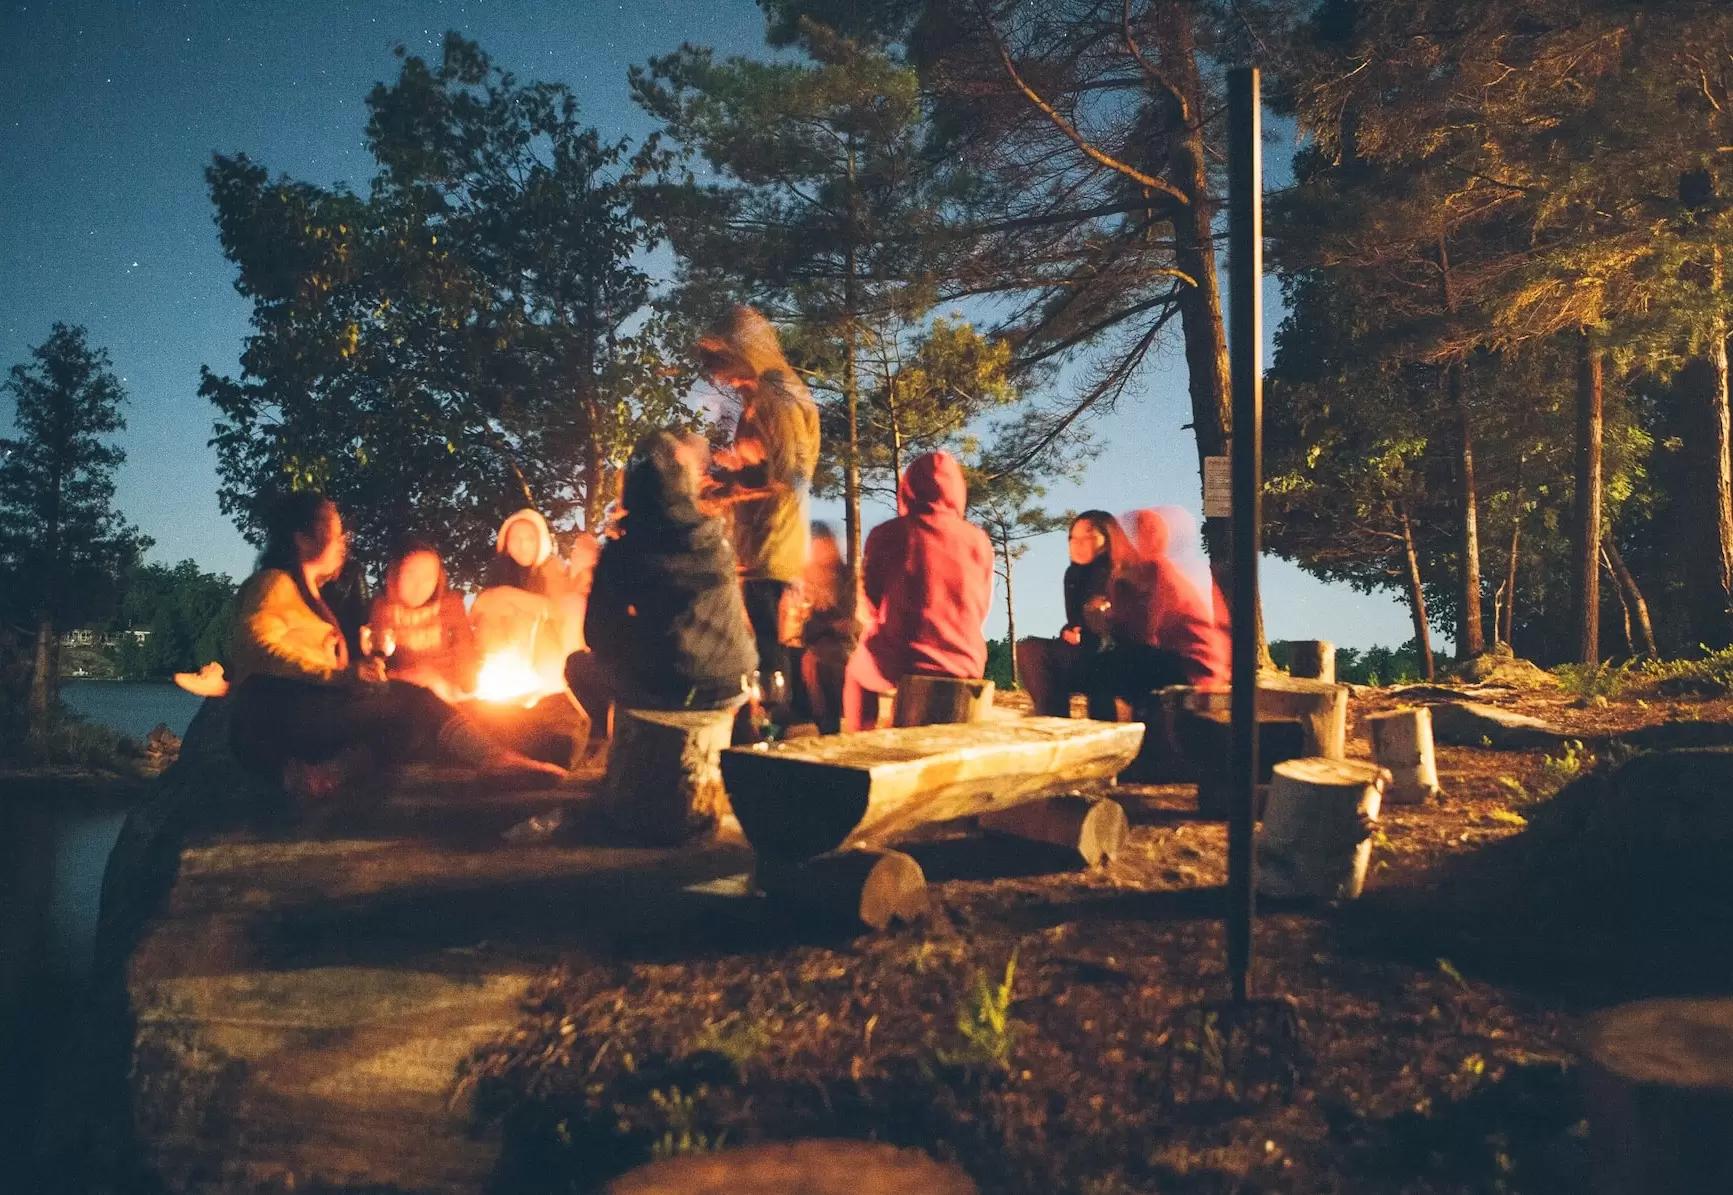 Camping under the stars of Platte Center